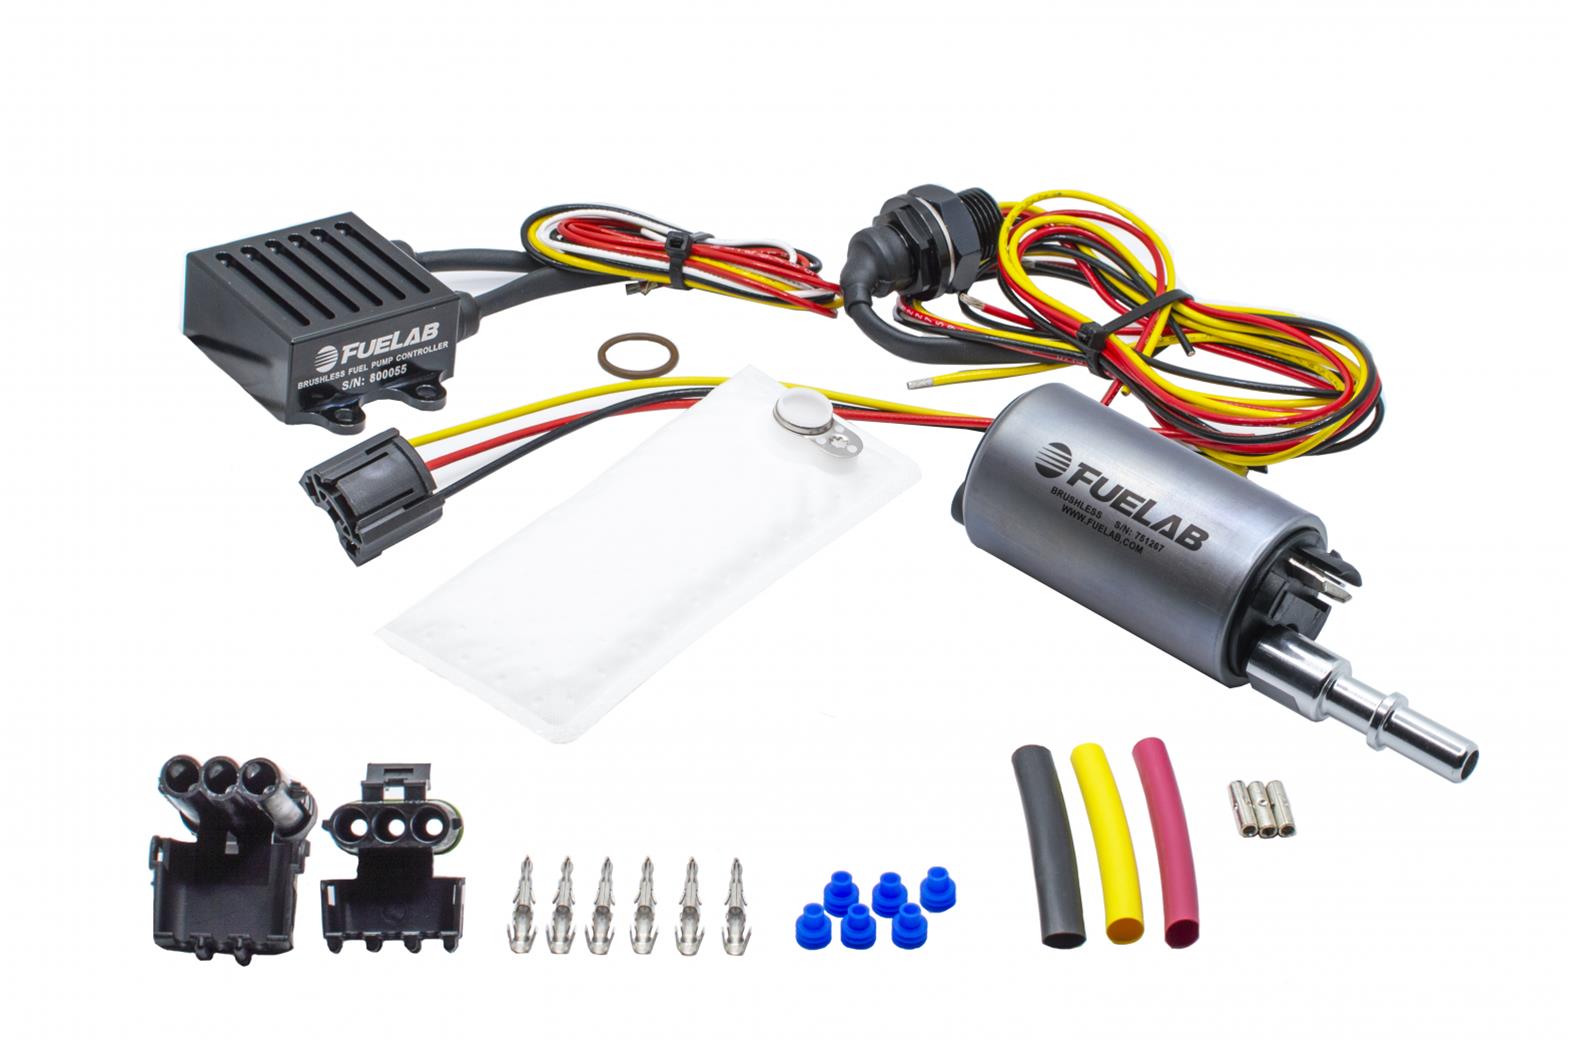 FUELAB 25303 In-Tank Brushless Fuel Pump Kit 350 LPH with 3/8 SAE Outlet Photo-0 